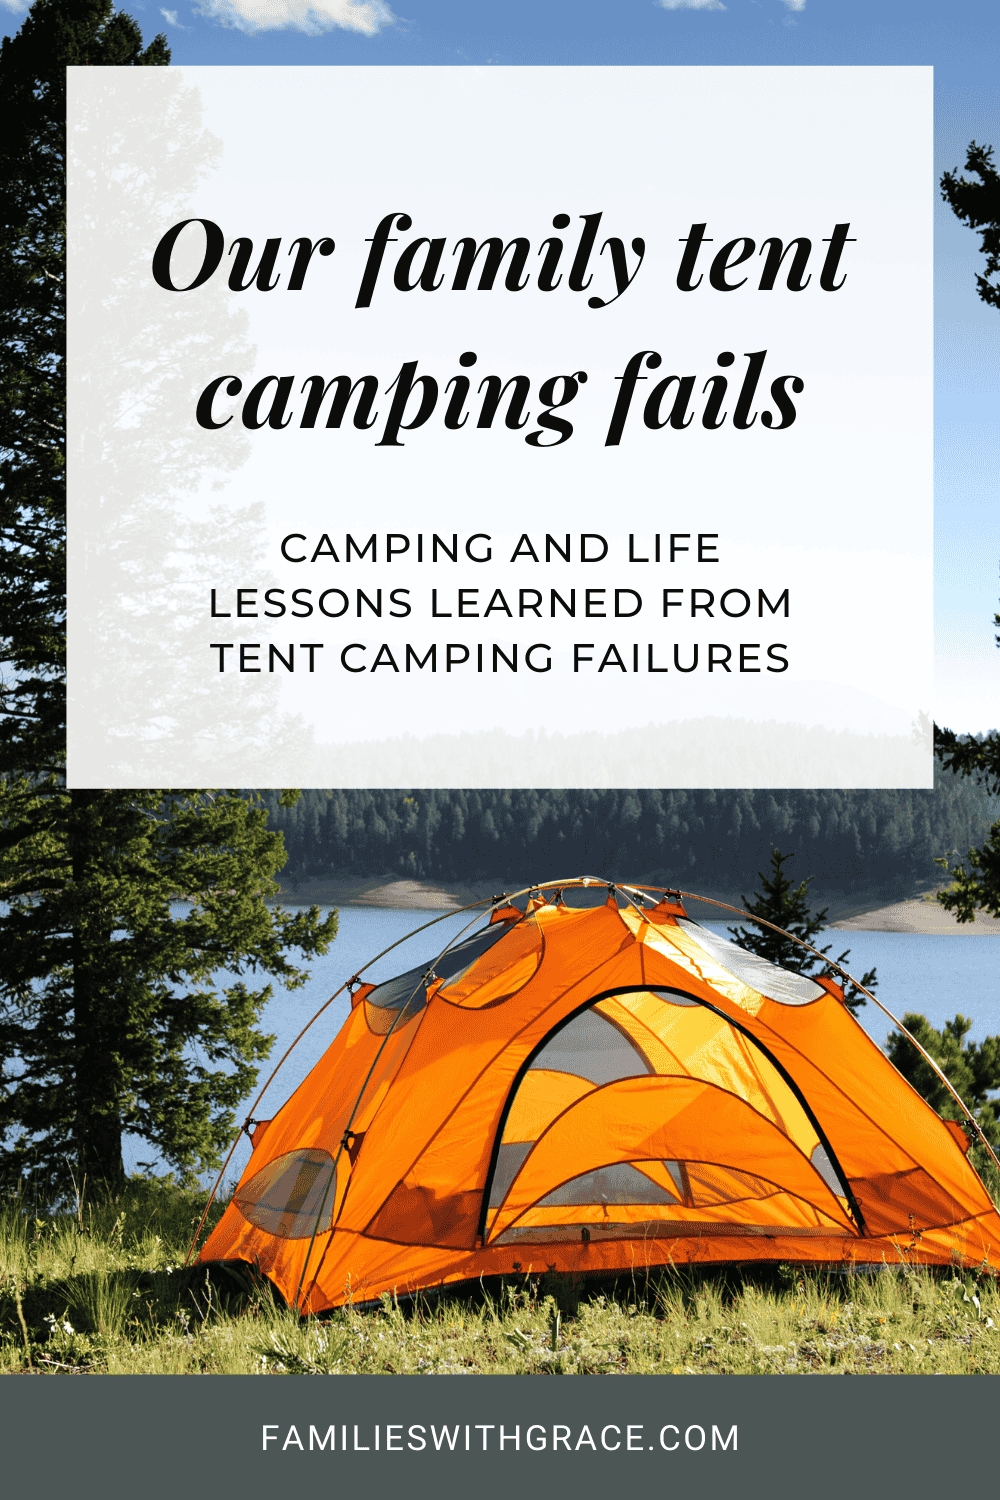 Our family tent camping fails